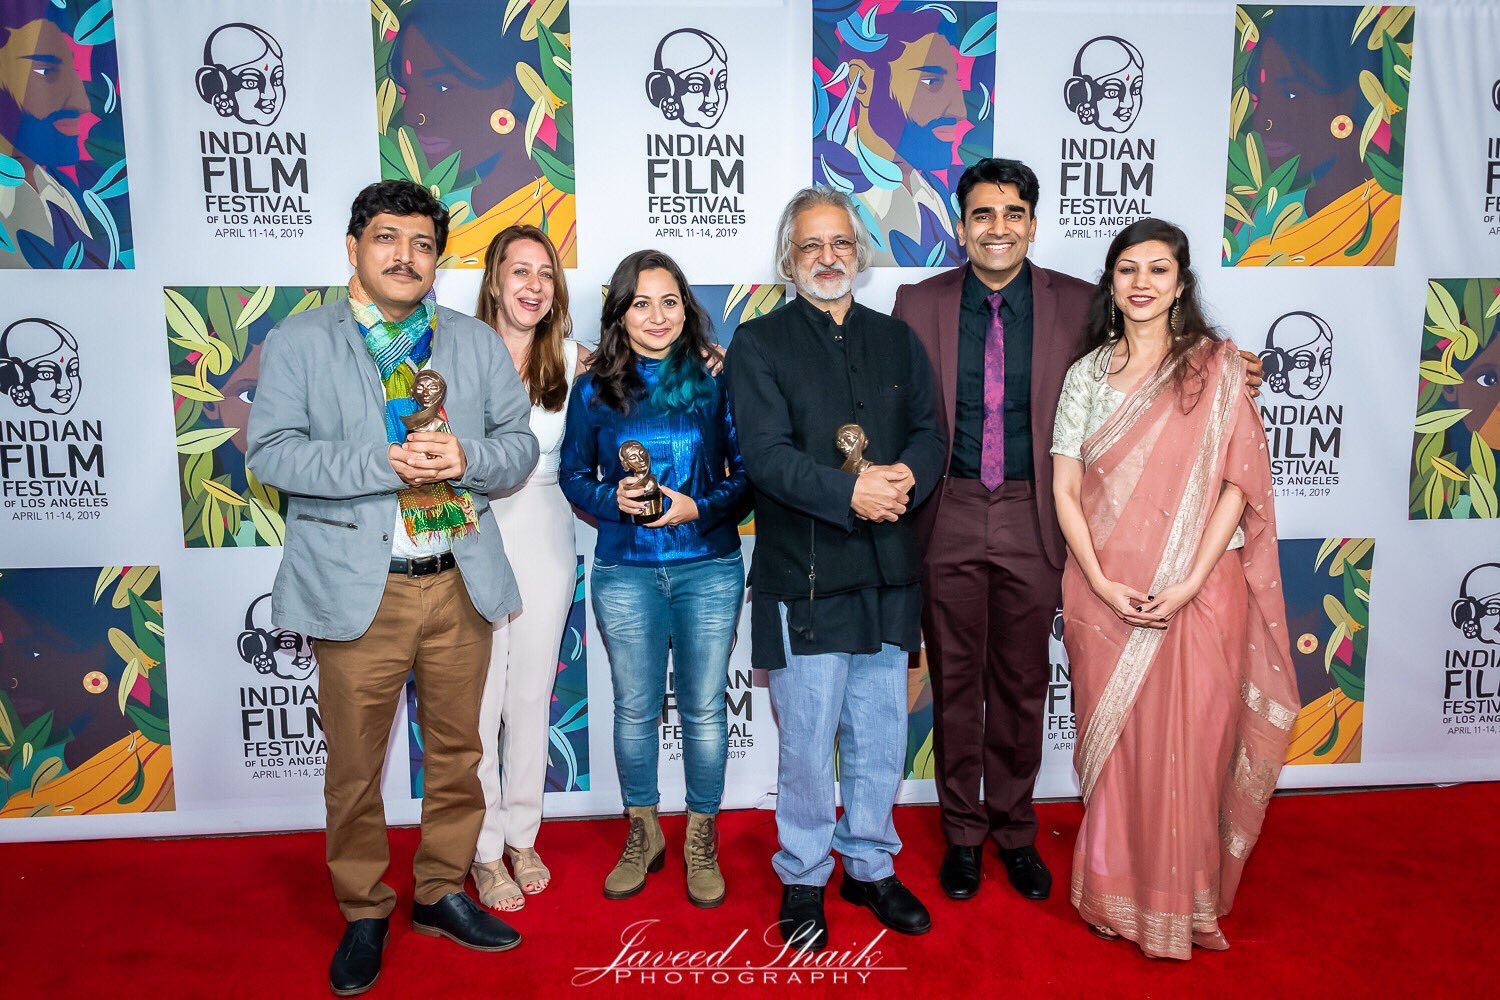 Women filmmakers shine at the 2019 Indian Film Festival of Los Angeles